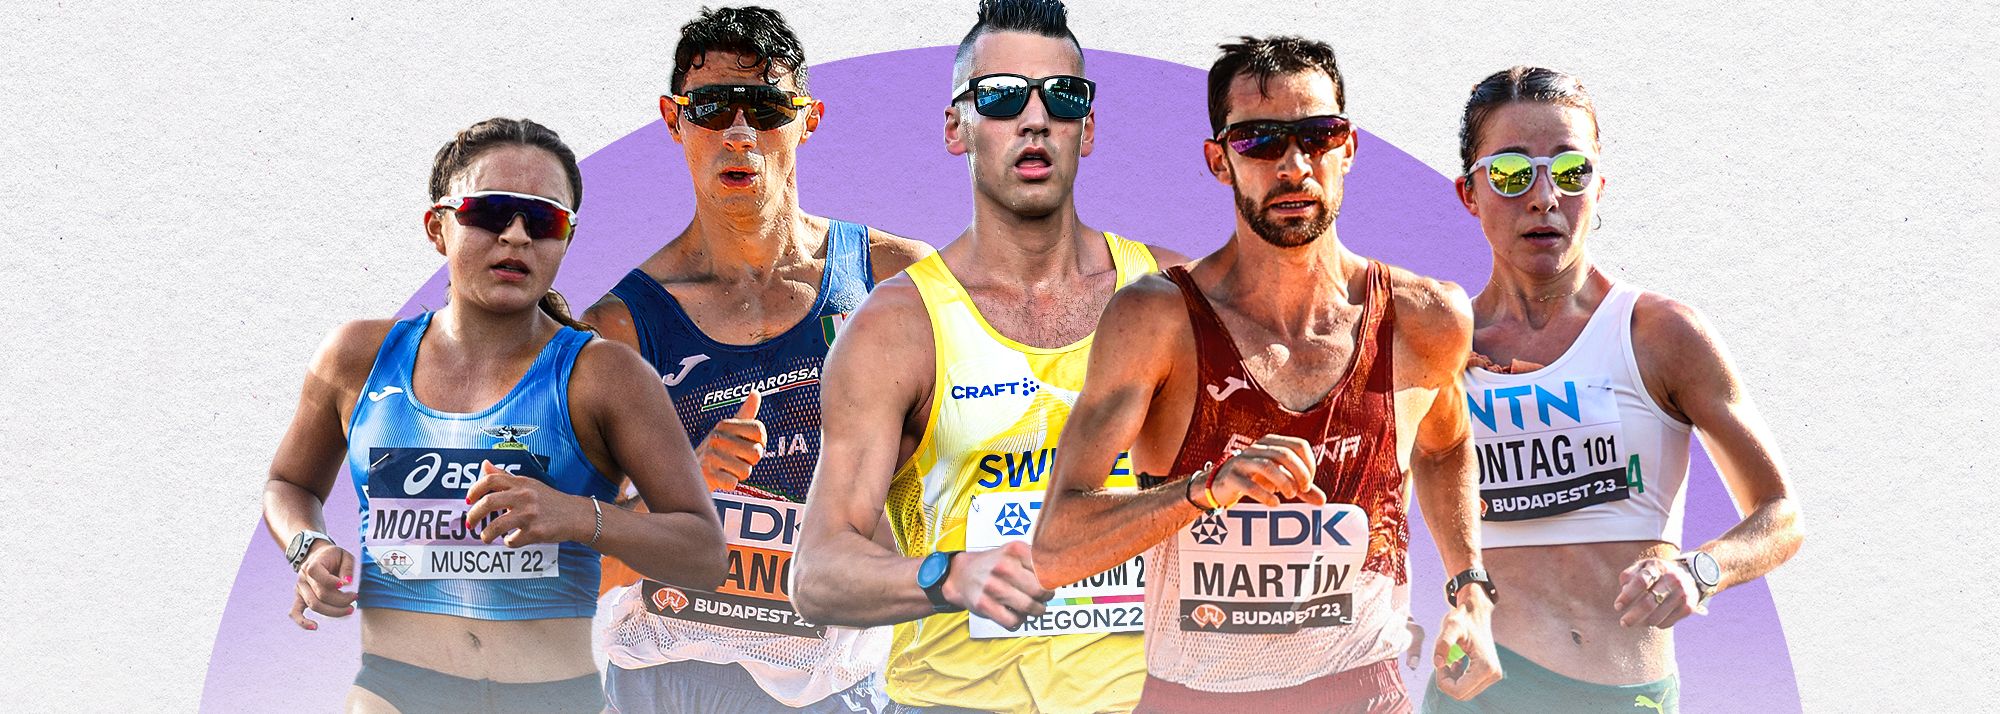 Watch and follow the World Race Walking Team Championships